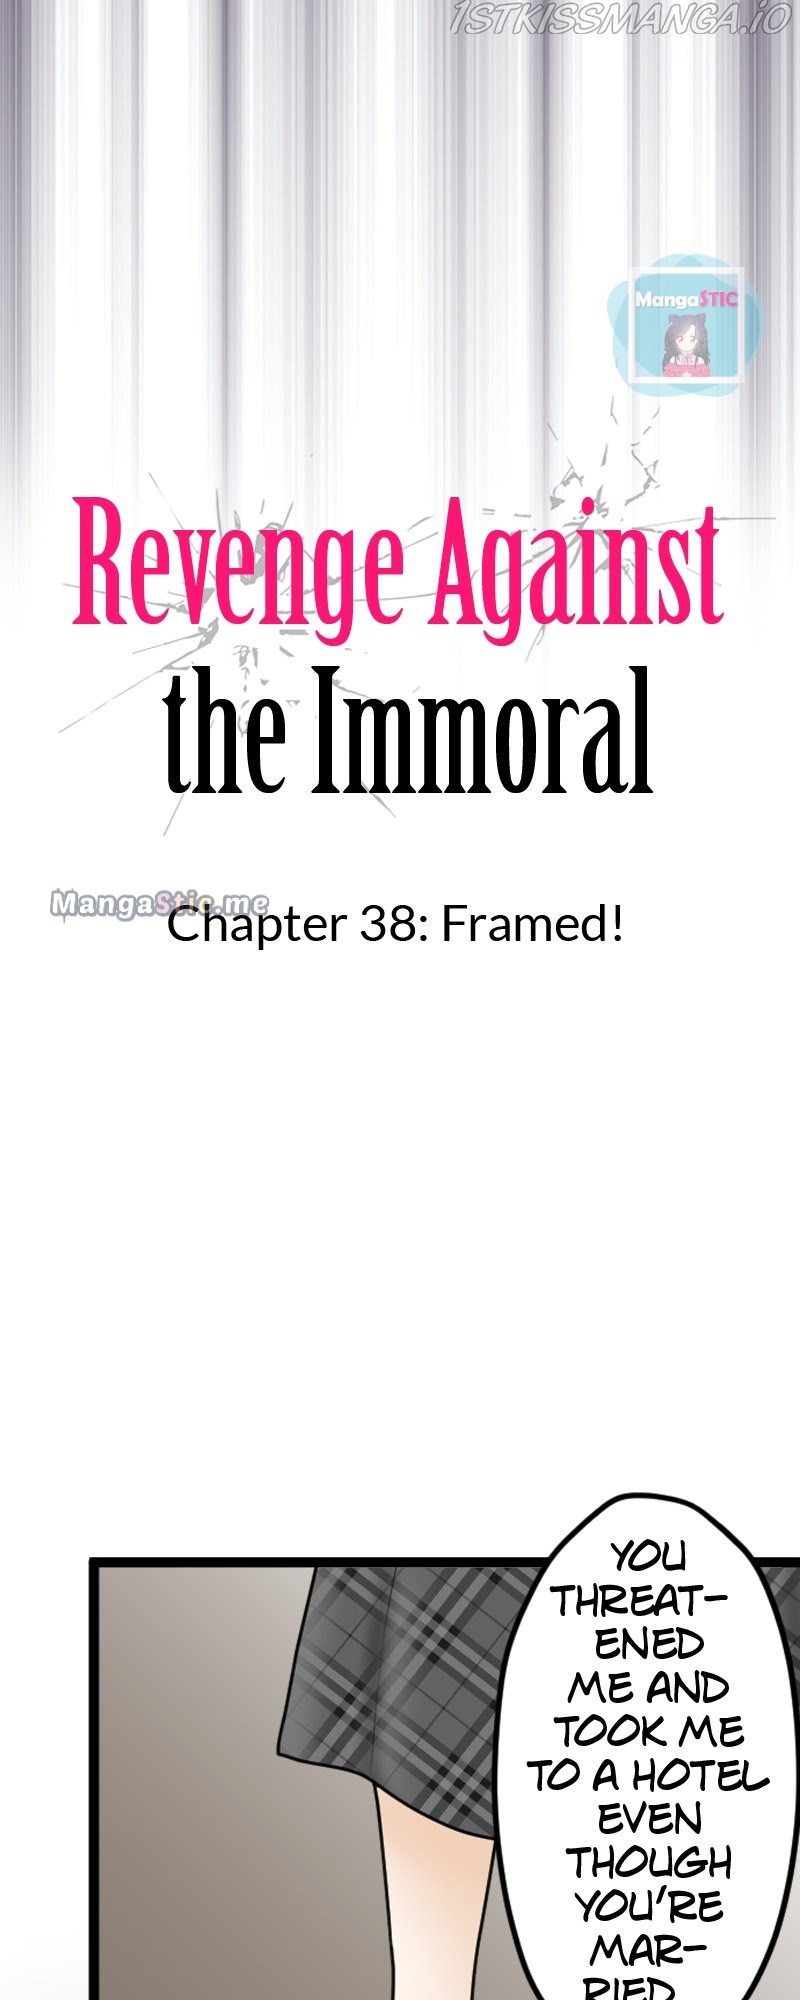 Revenge Against The Immoral - Page 3